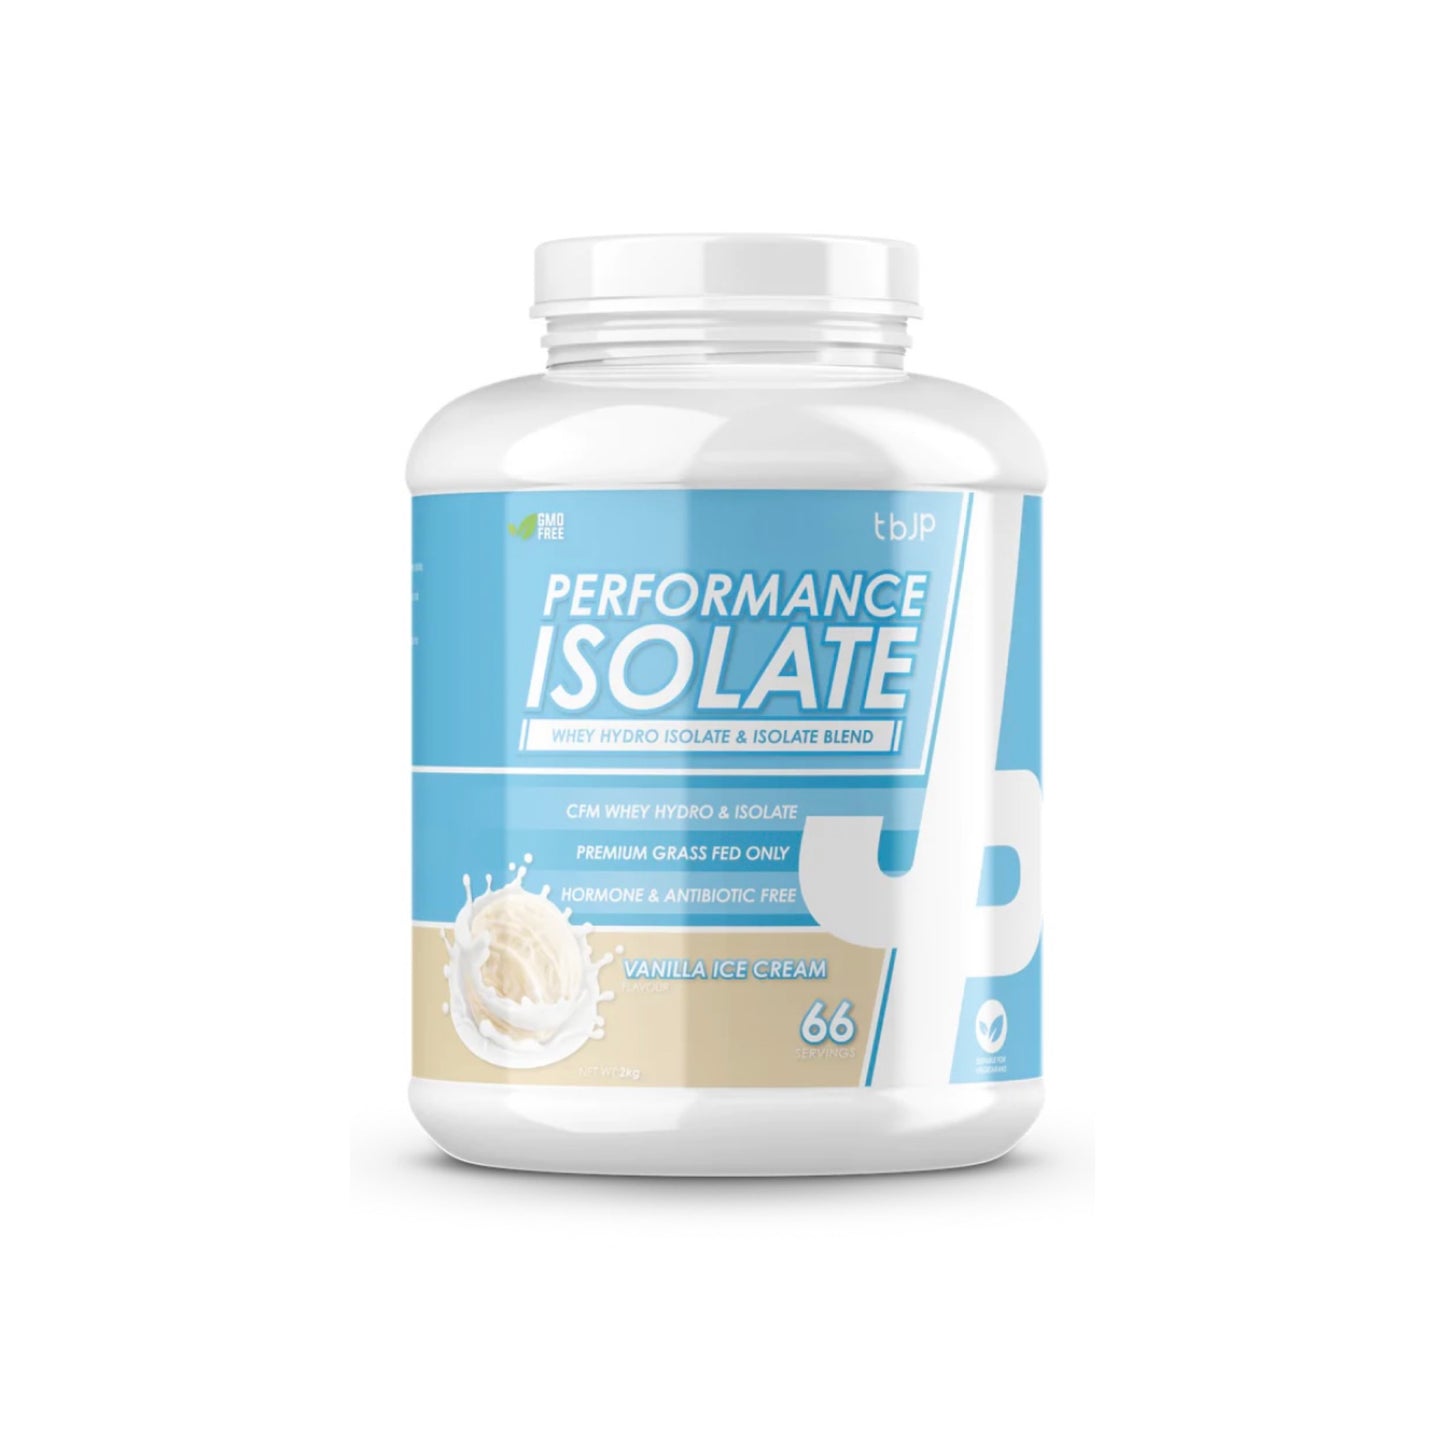 TRAINED BY JP NUTRITION - PERFORMANCE ISOLATE TRI BLEND 2KG 66 SERVINGS